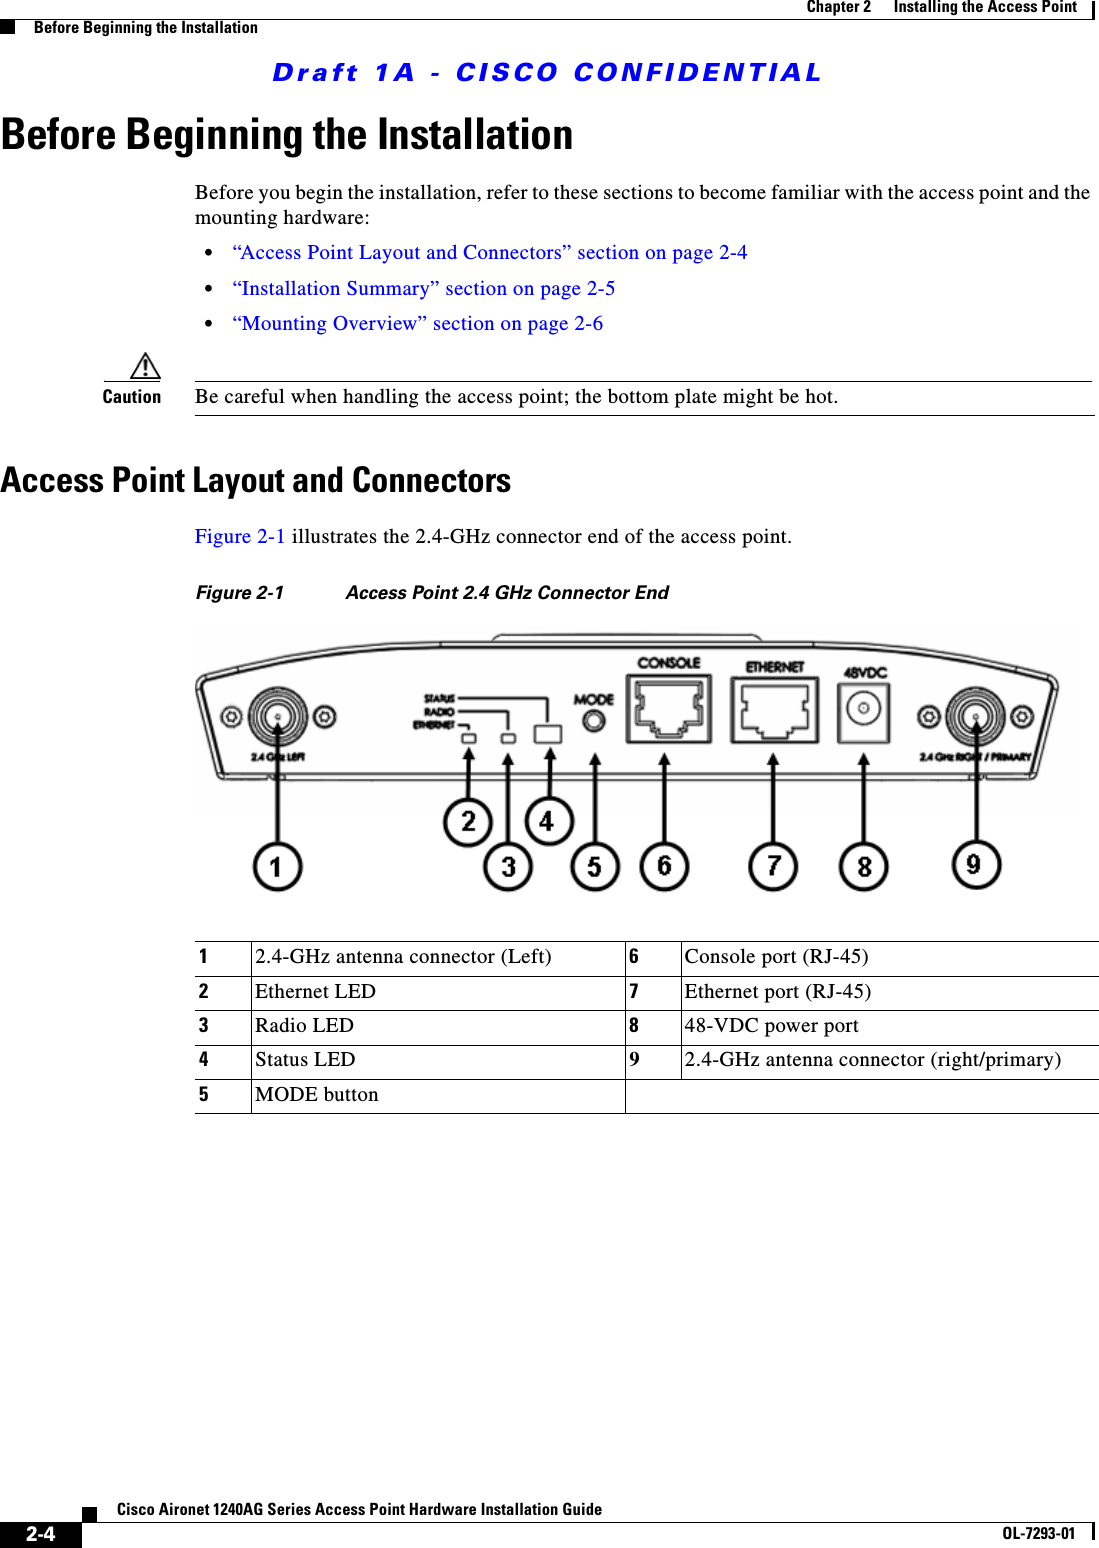 Draft 1A - CISCO CONFIDENTIAL2-4Cisco Aironet 1240AG Series Access Point Hardware Installation GuideOL-7293-01Chapter 2      Installing the Access PointBefore Beginning the InstallationBefore Beginning the InstallationBefore you begin the installation, refer to these sections to become familiar with the access point and the mounting hardware:•“Access Point Layout and Connectors” section on page 2-4•“Installation Summary” section on page 2-5•“Mounting Overview” section on page 2-6Caution Be careful when handling the access point; the bottom plate might be hot.Access Point Layout and ConnectorsFigure 2-1 illustrates the 2.4-GHz connector end of the access point.Figure 2-1 Access Point 2.4 GHz Connector End12.4-GHz antenna connector (Left) 6Console port (RJ-45)2Ethernet LED 7Ethernet port (RJ-45)3Radio LED 848-VDC power port4Status LED 92.4-GHz antenna connector (right/primary)5MODE button